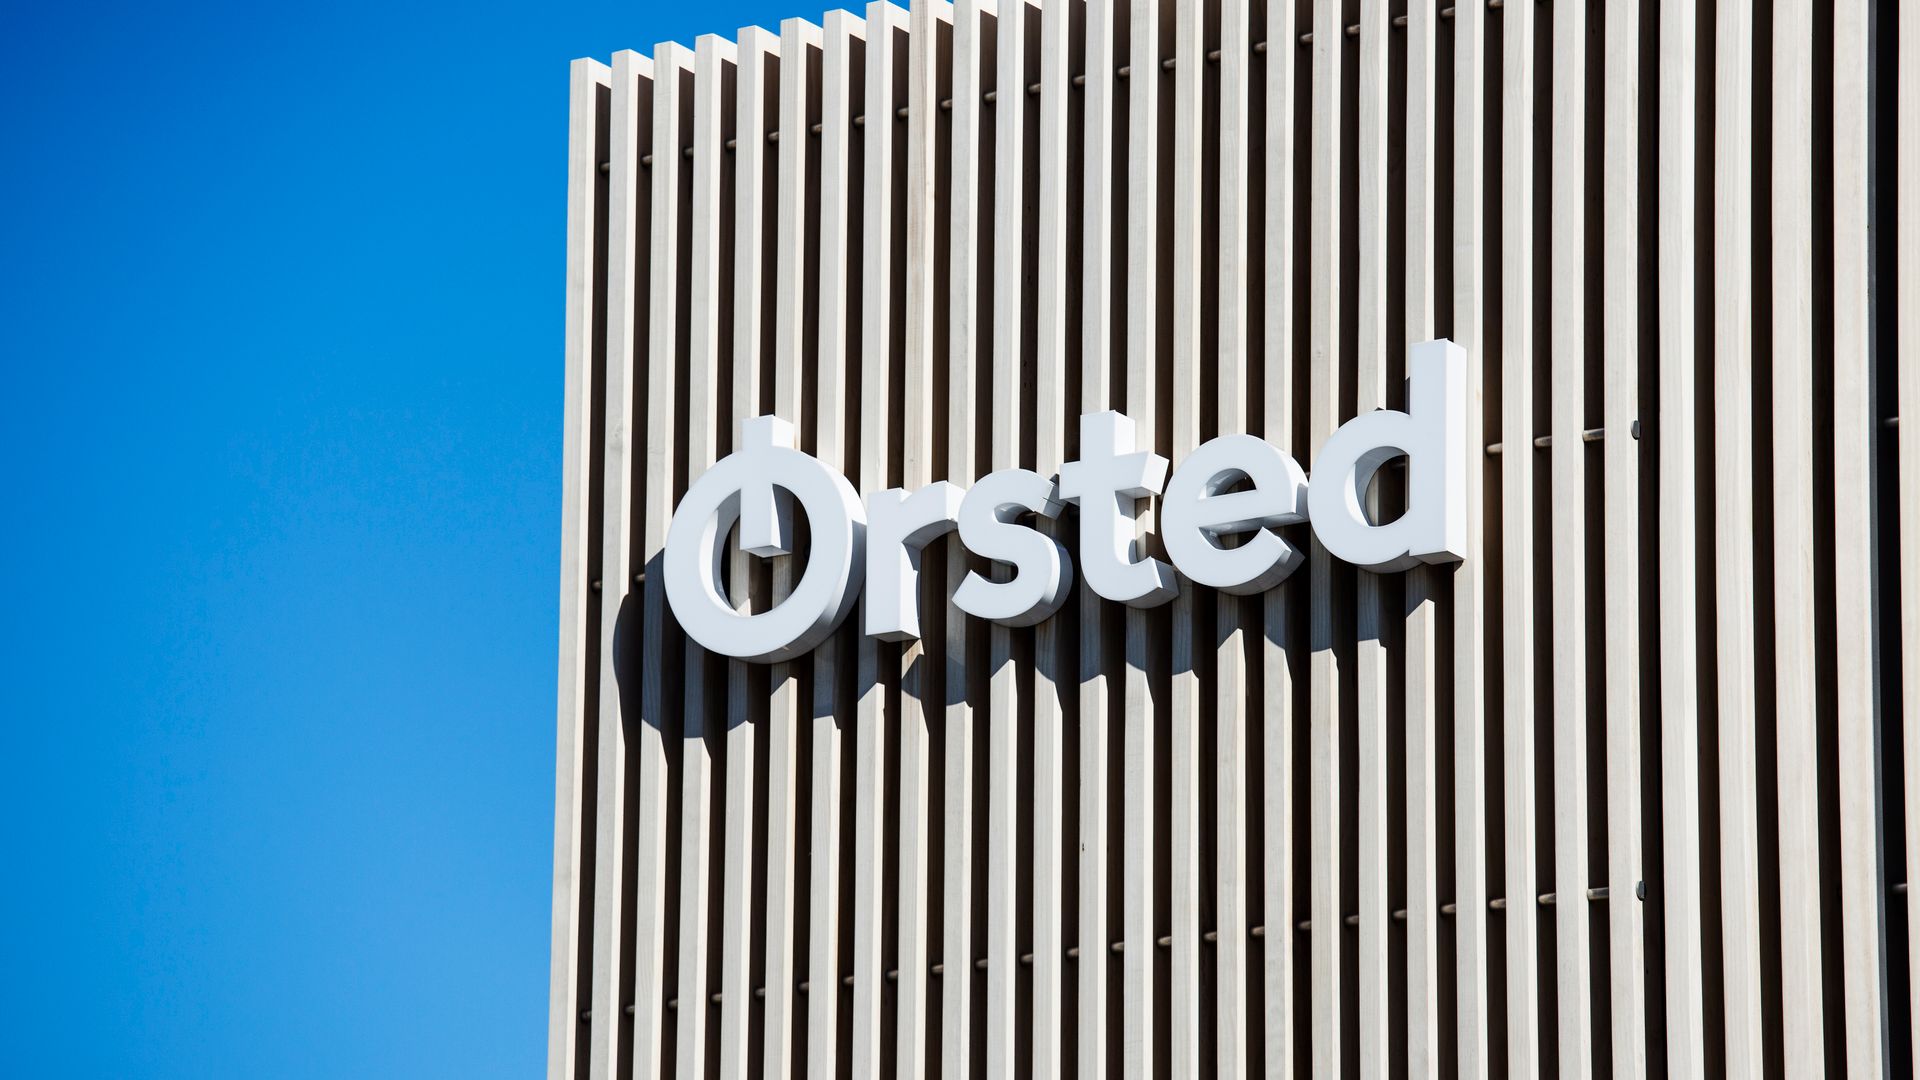 Ørsted owns half of the plant through a joint venture. | Photo: Ørsted / Pr